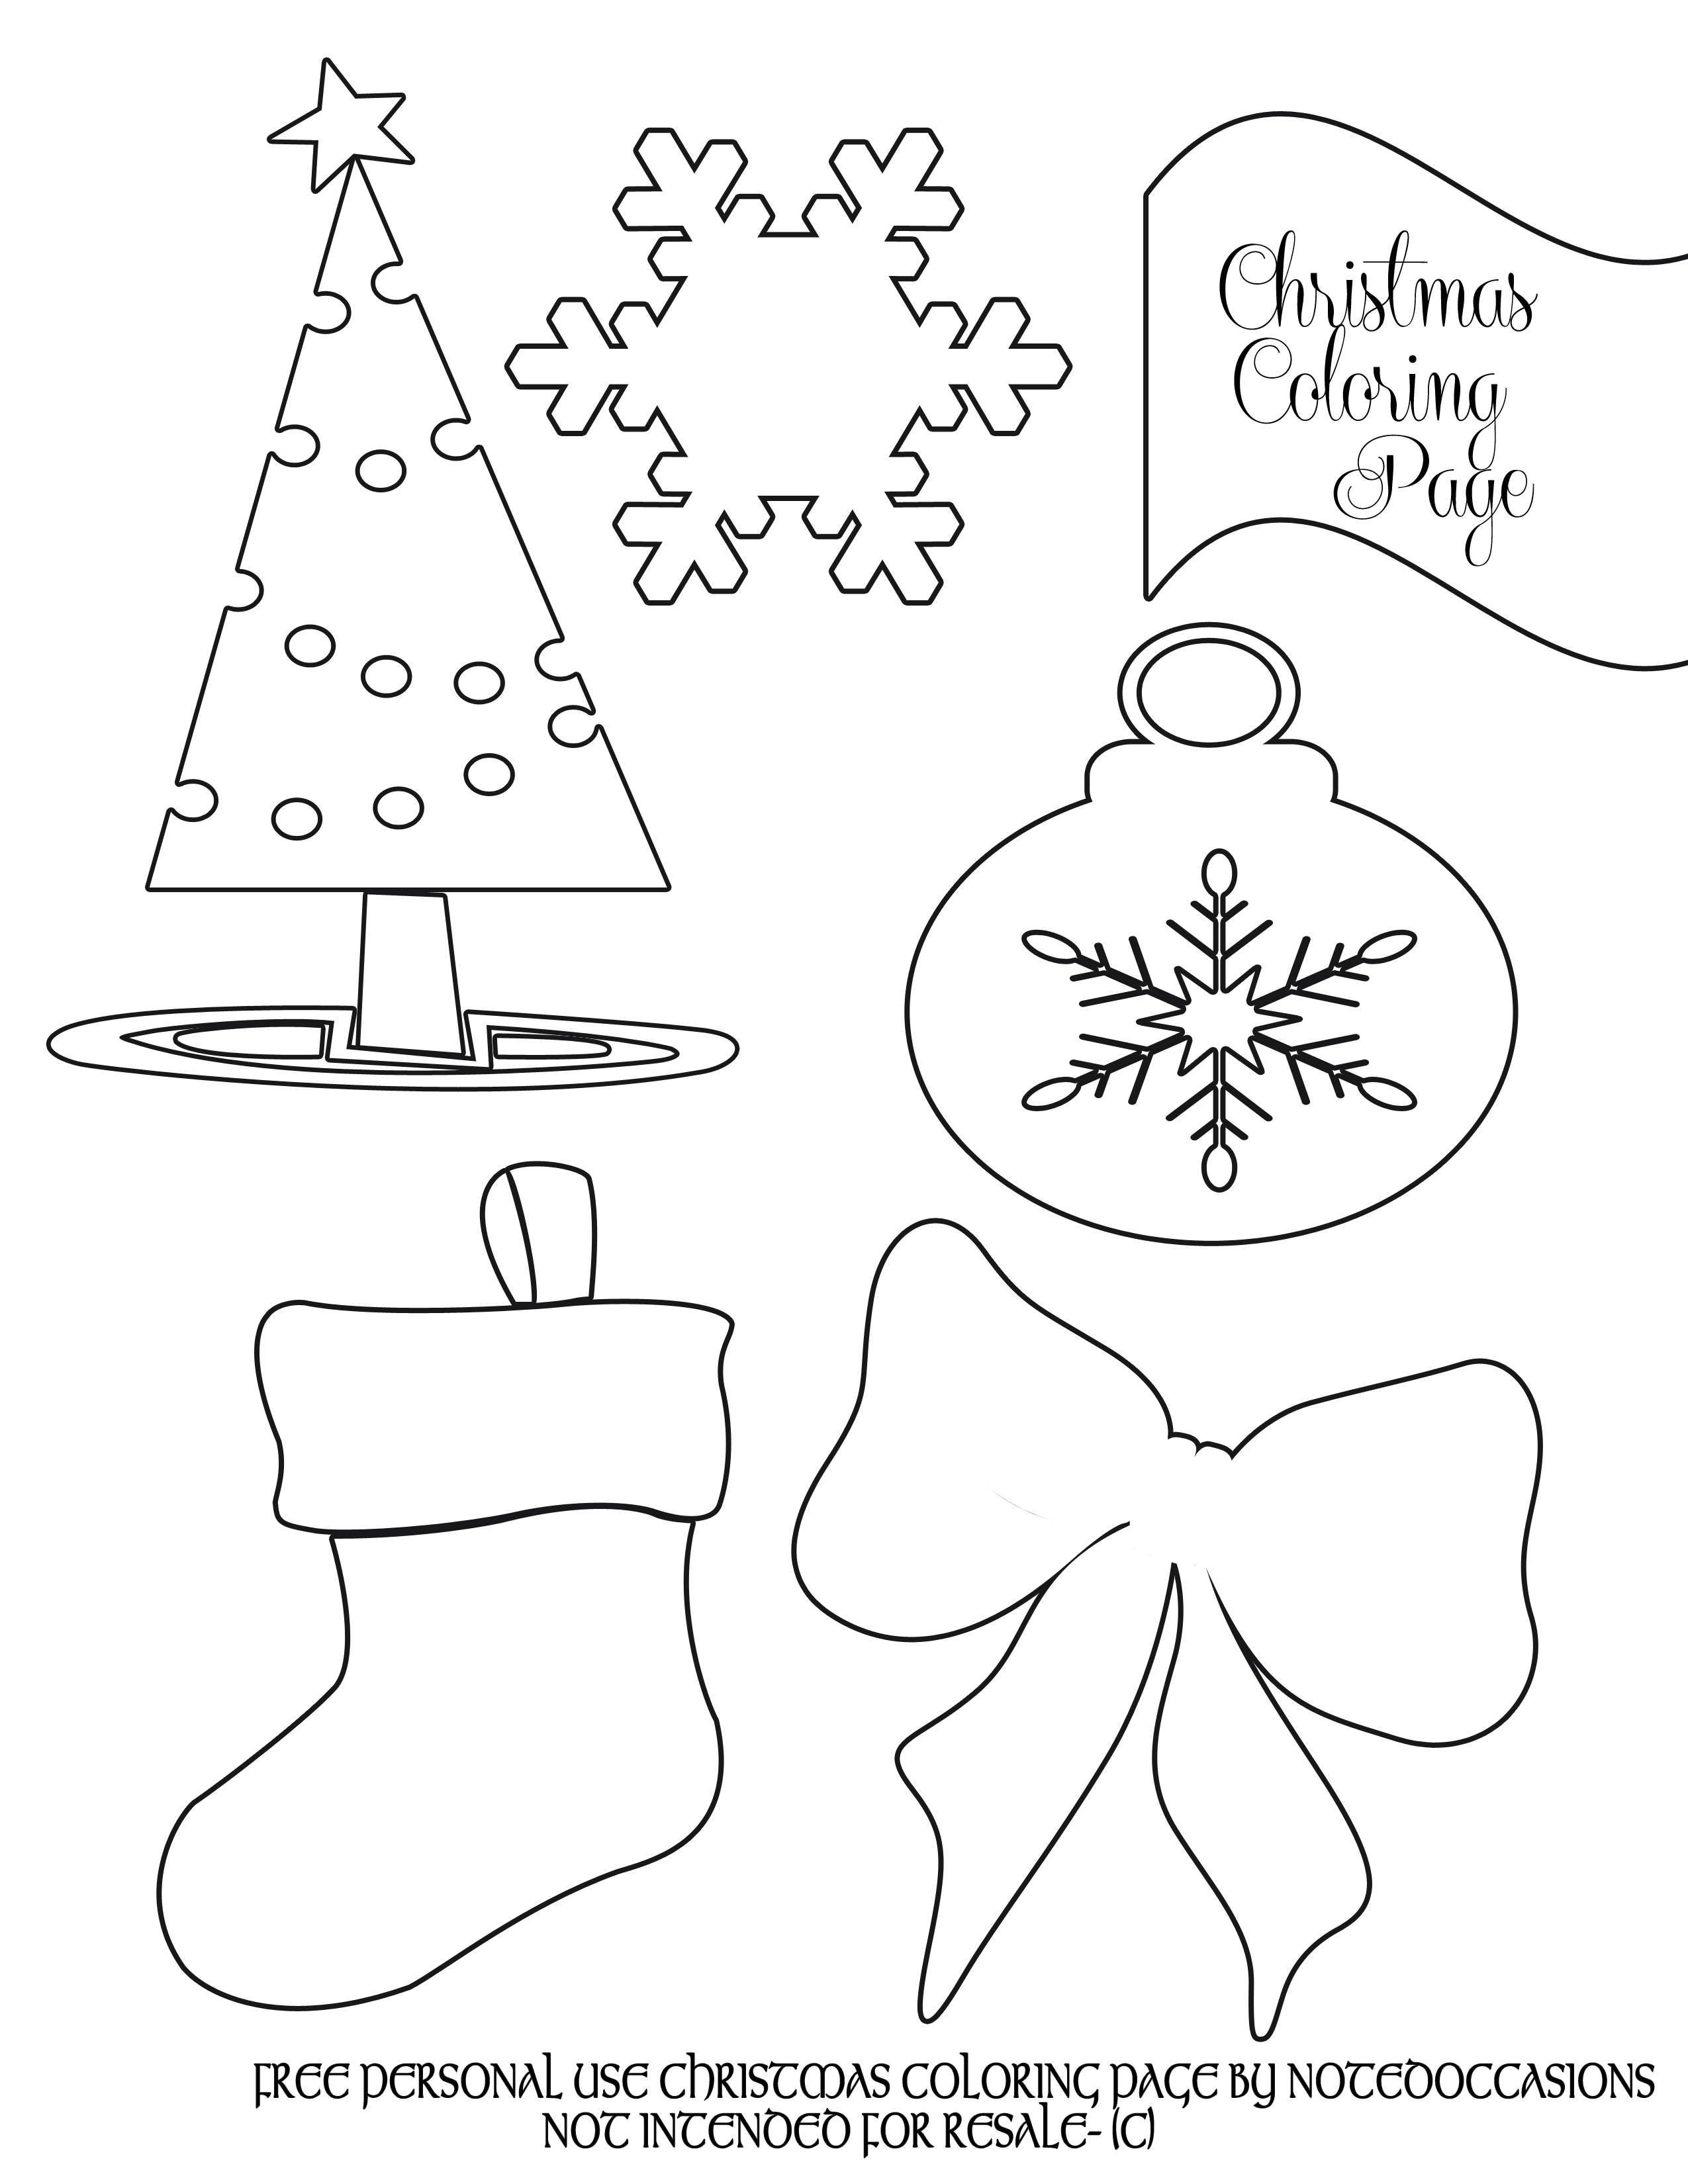 Party Simplicity Free Christmas Coloring Pages To Print - Party - Free Printable Christmas Coloring Pages For Kids